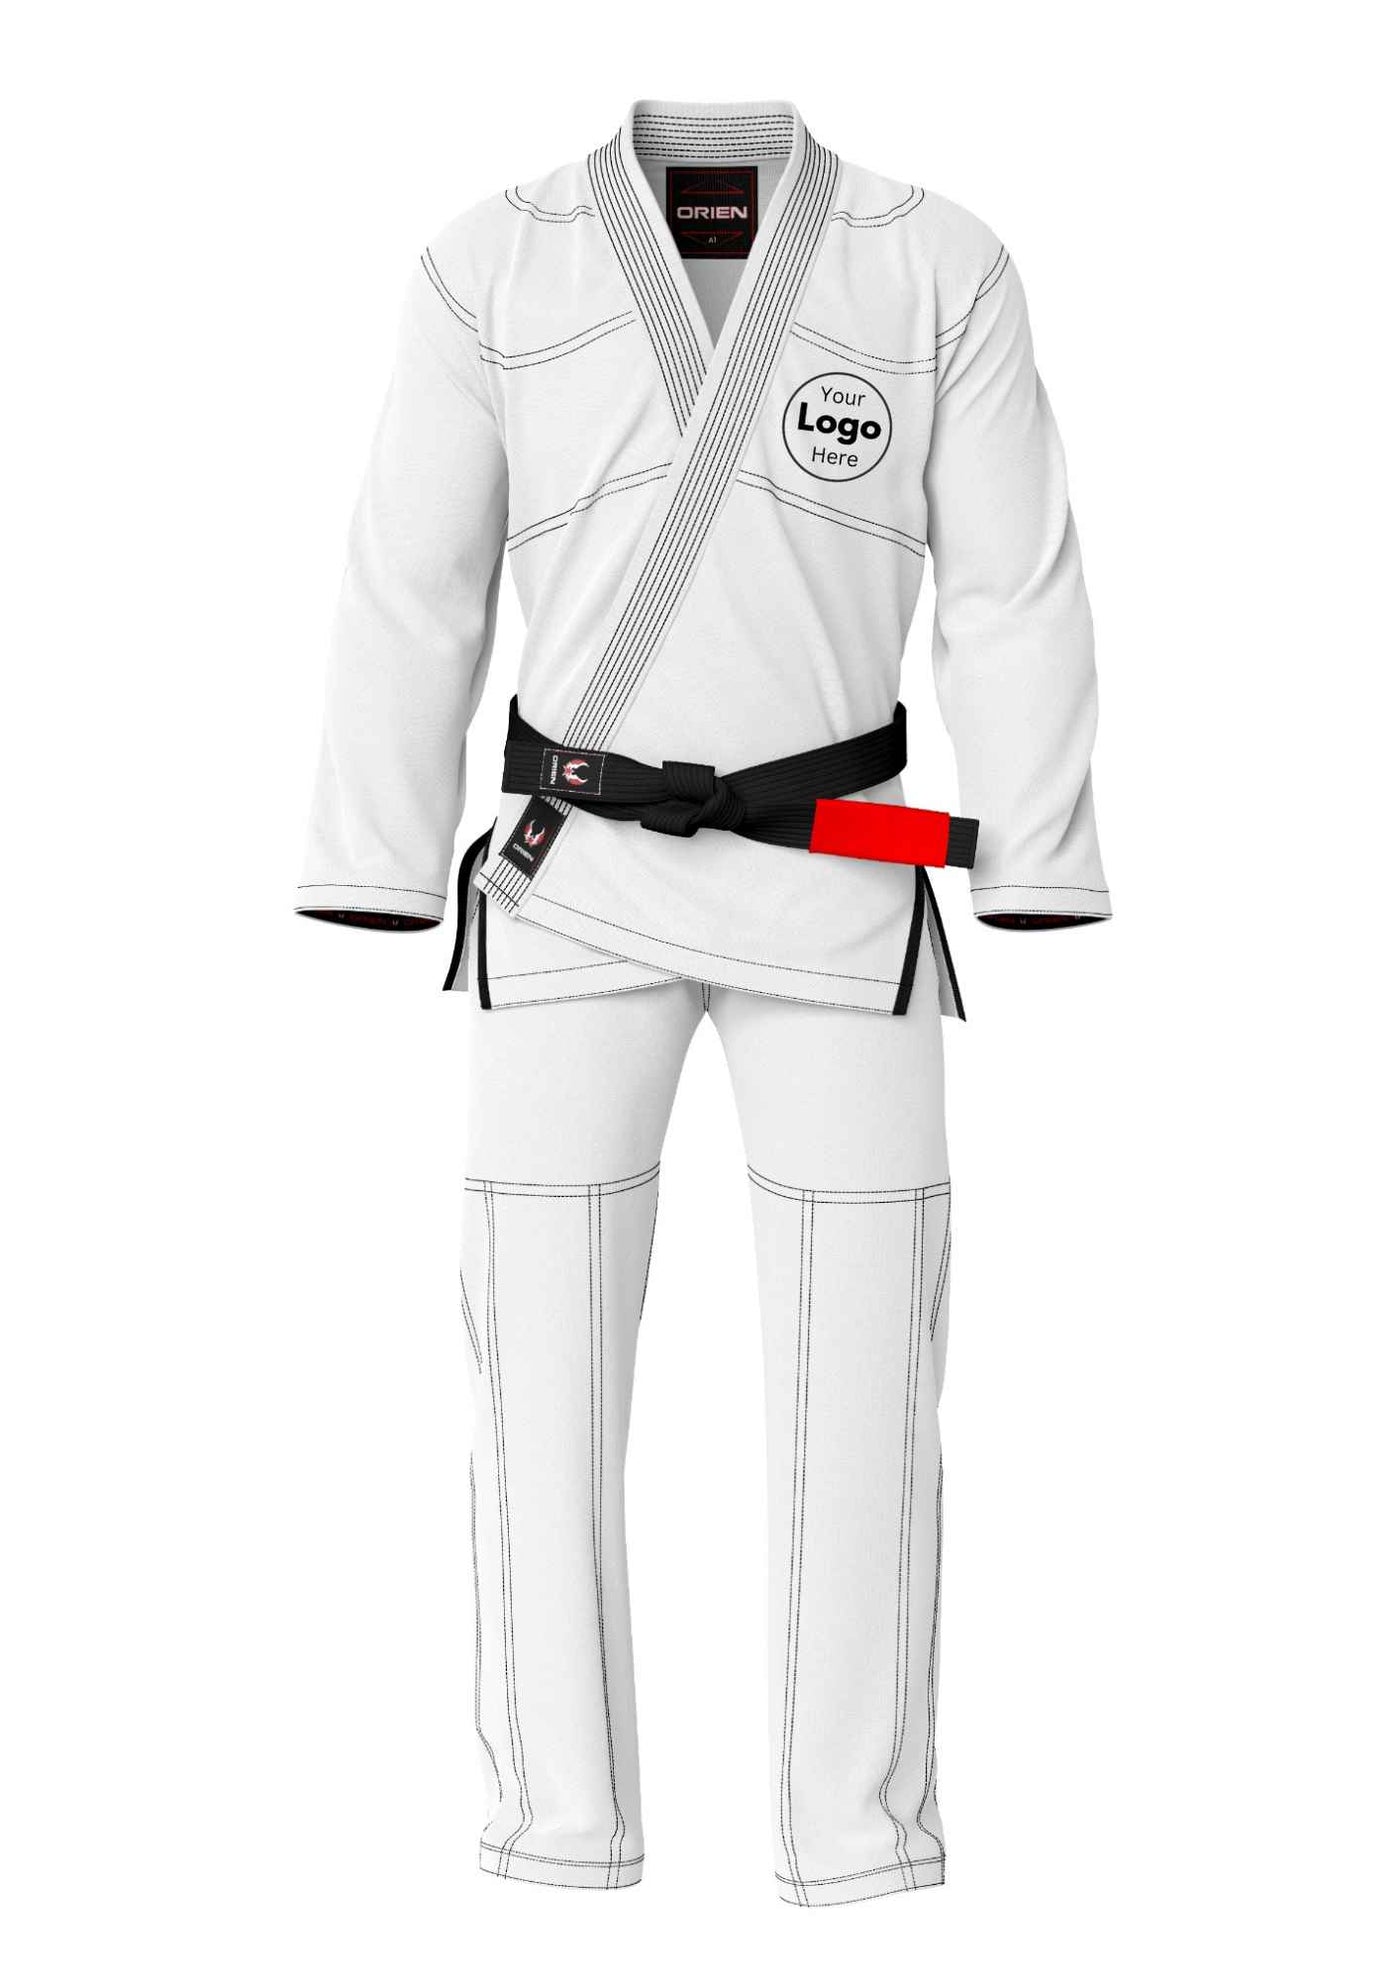 Best Fitted Bjj Gis